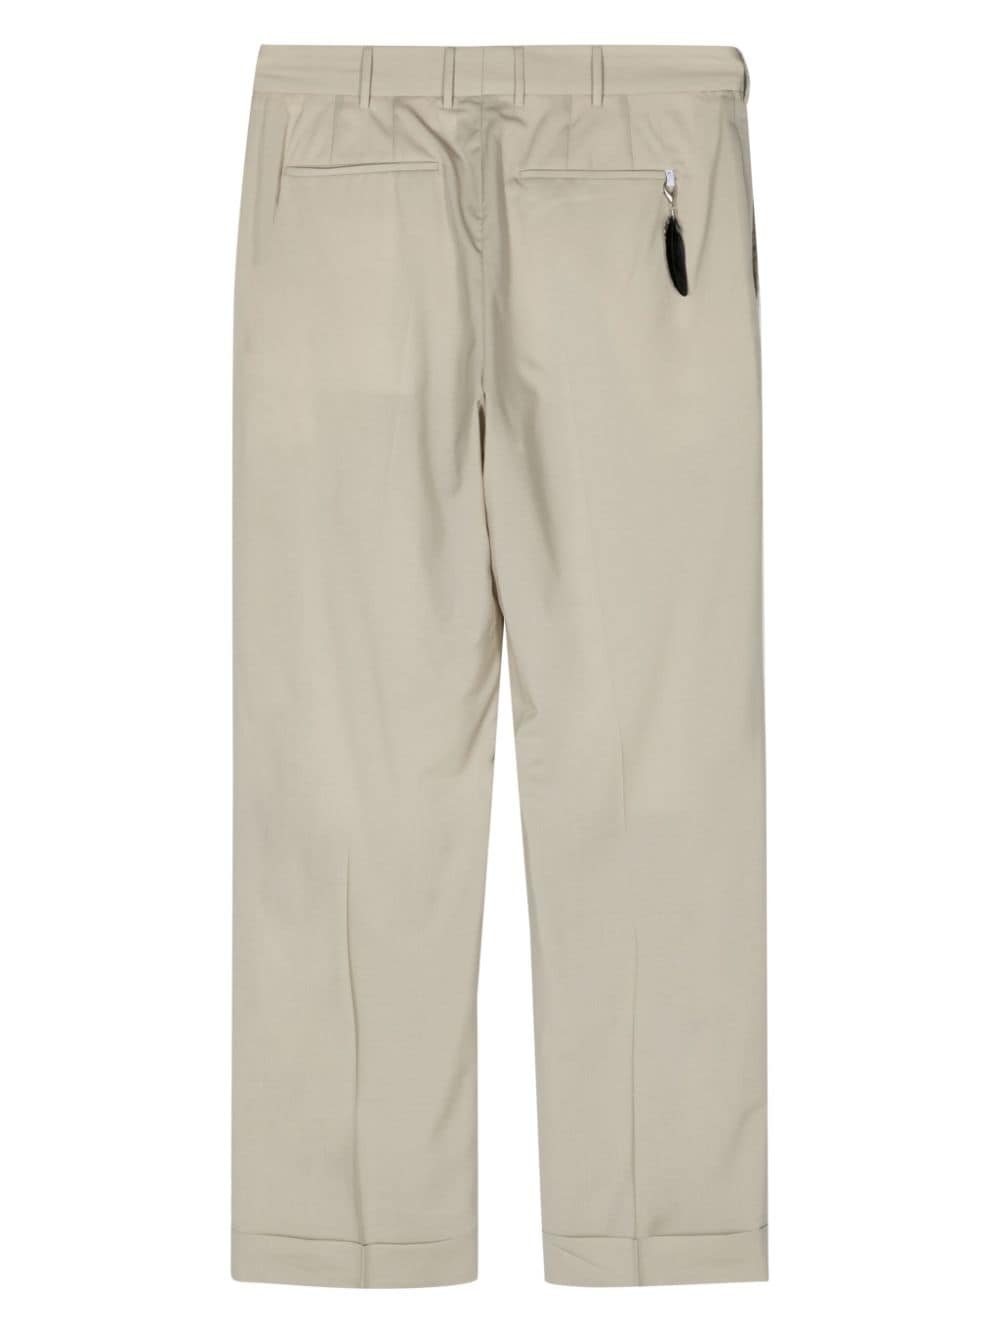 PT Torino mid-rise tailored trousers - Beige